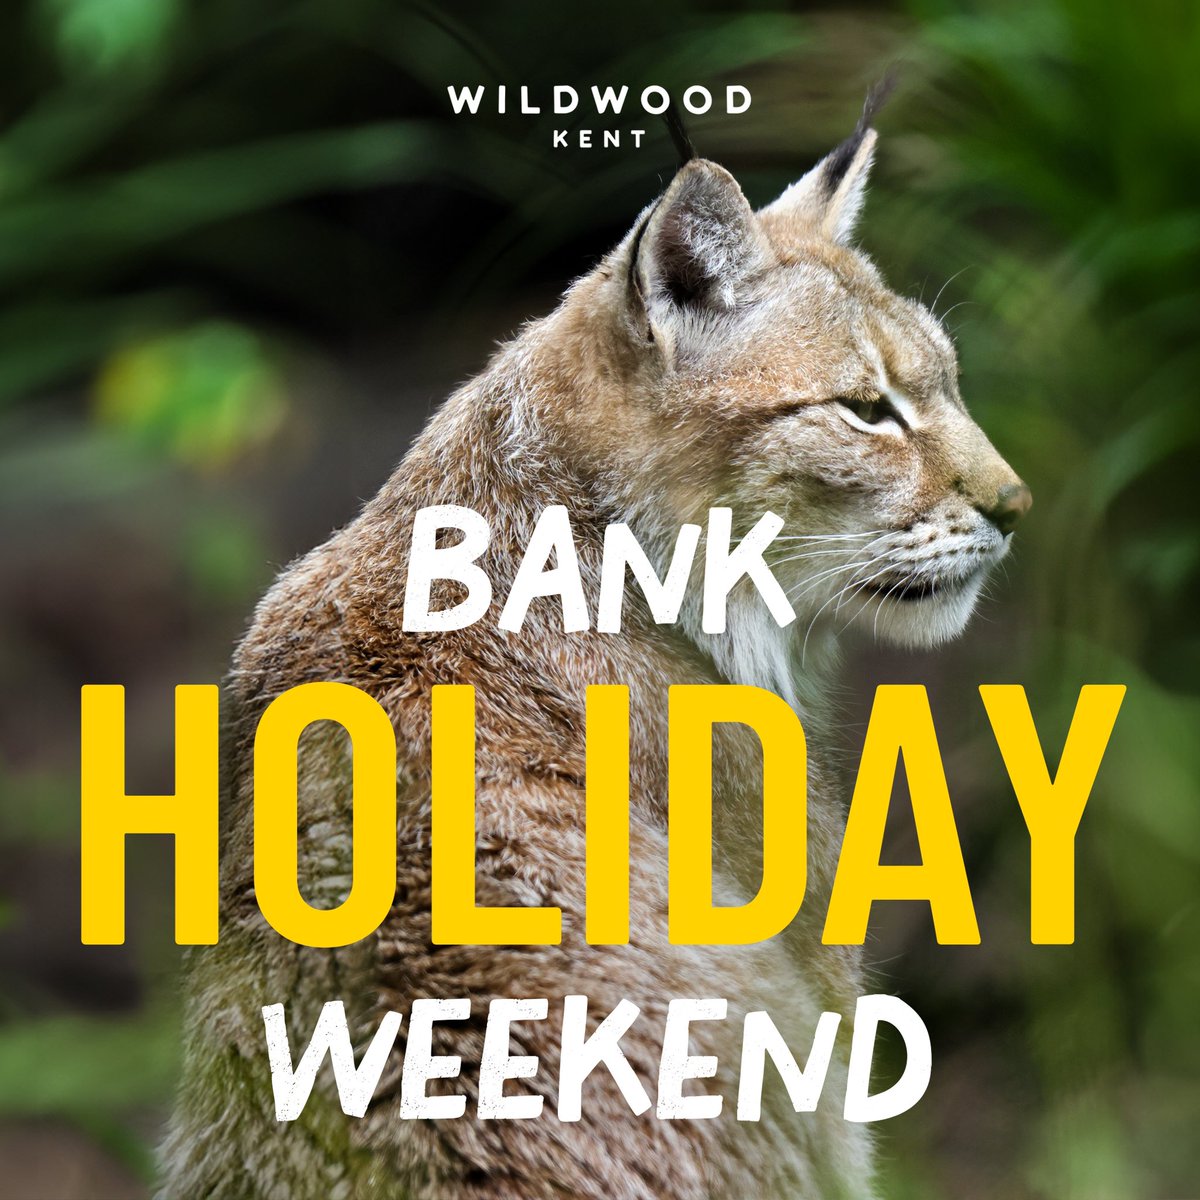 Two Bank Holidays in May you say 😏 Get ready for an action packed May at Wildwood Kent! Starting off with our first Bank Holiday this weekend 🥳 Get the gang together and let the little ones explore our ancient woodland 🌲🐻🐺🦦 #wildwoodtrust #kent #may